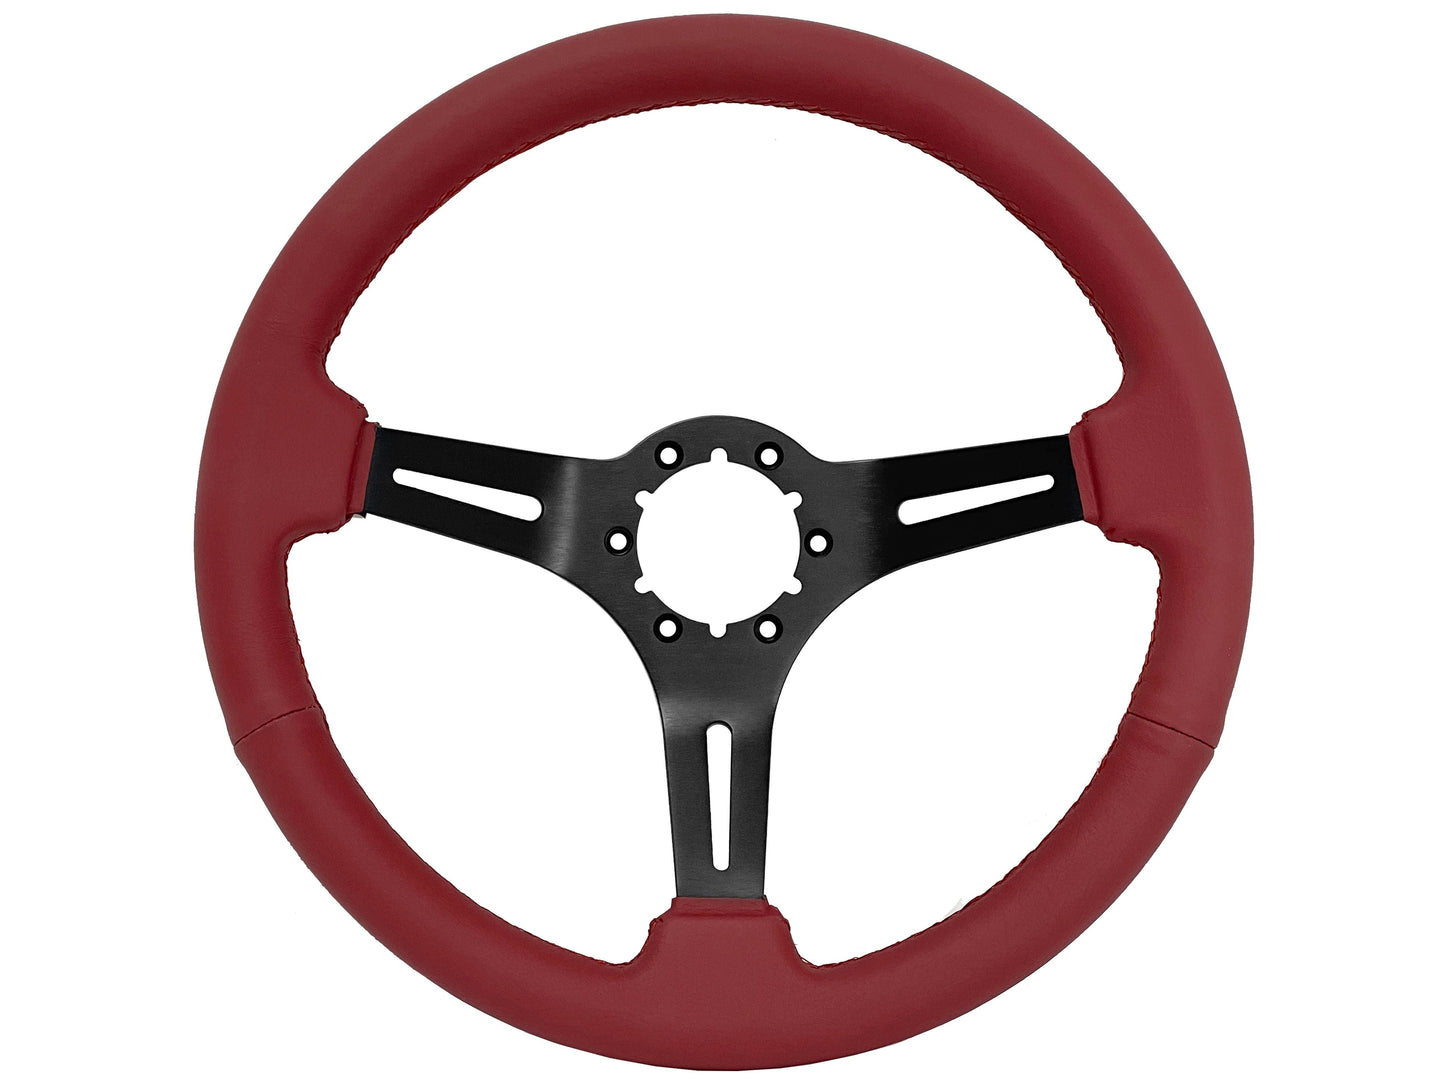 1965-68, 70-77 Ford Truck Steering Wheel Kit | Red Leather | ST3060RED